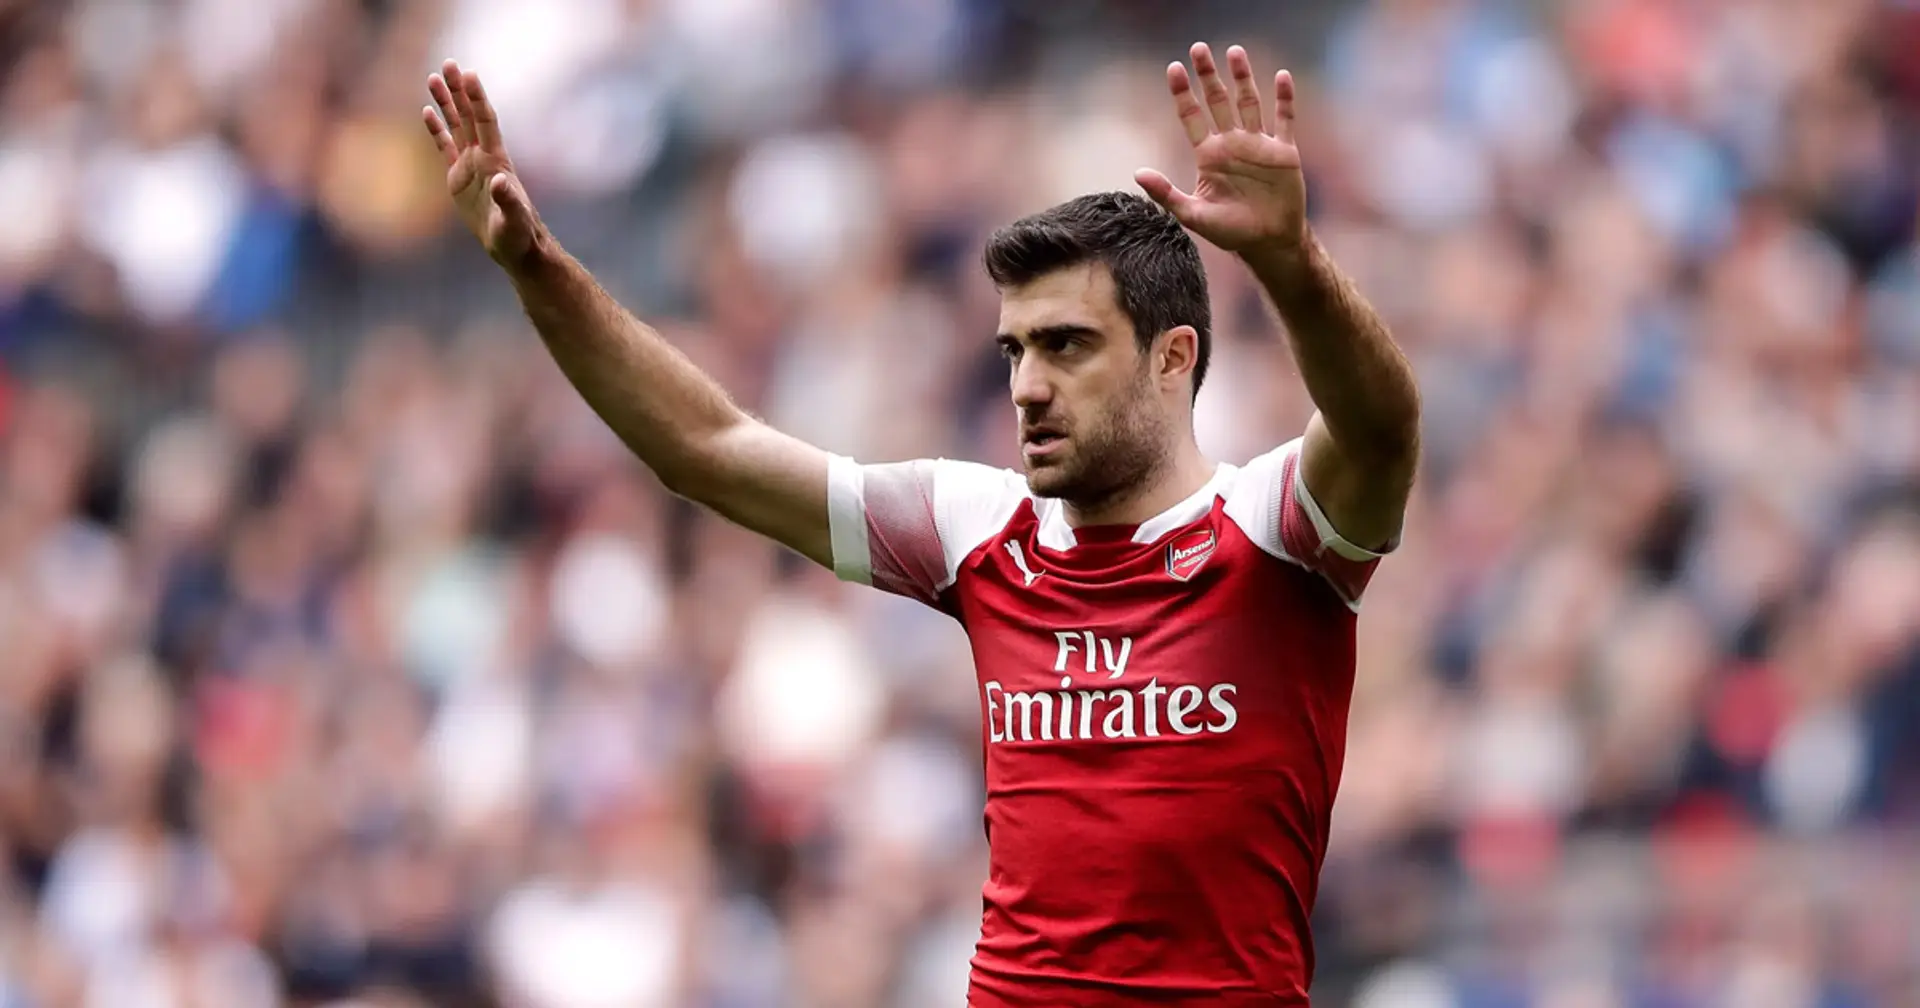 Sokratis set to leave this month, Fenerbahce and Genoa interested (reliability: 5 stars)